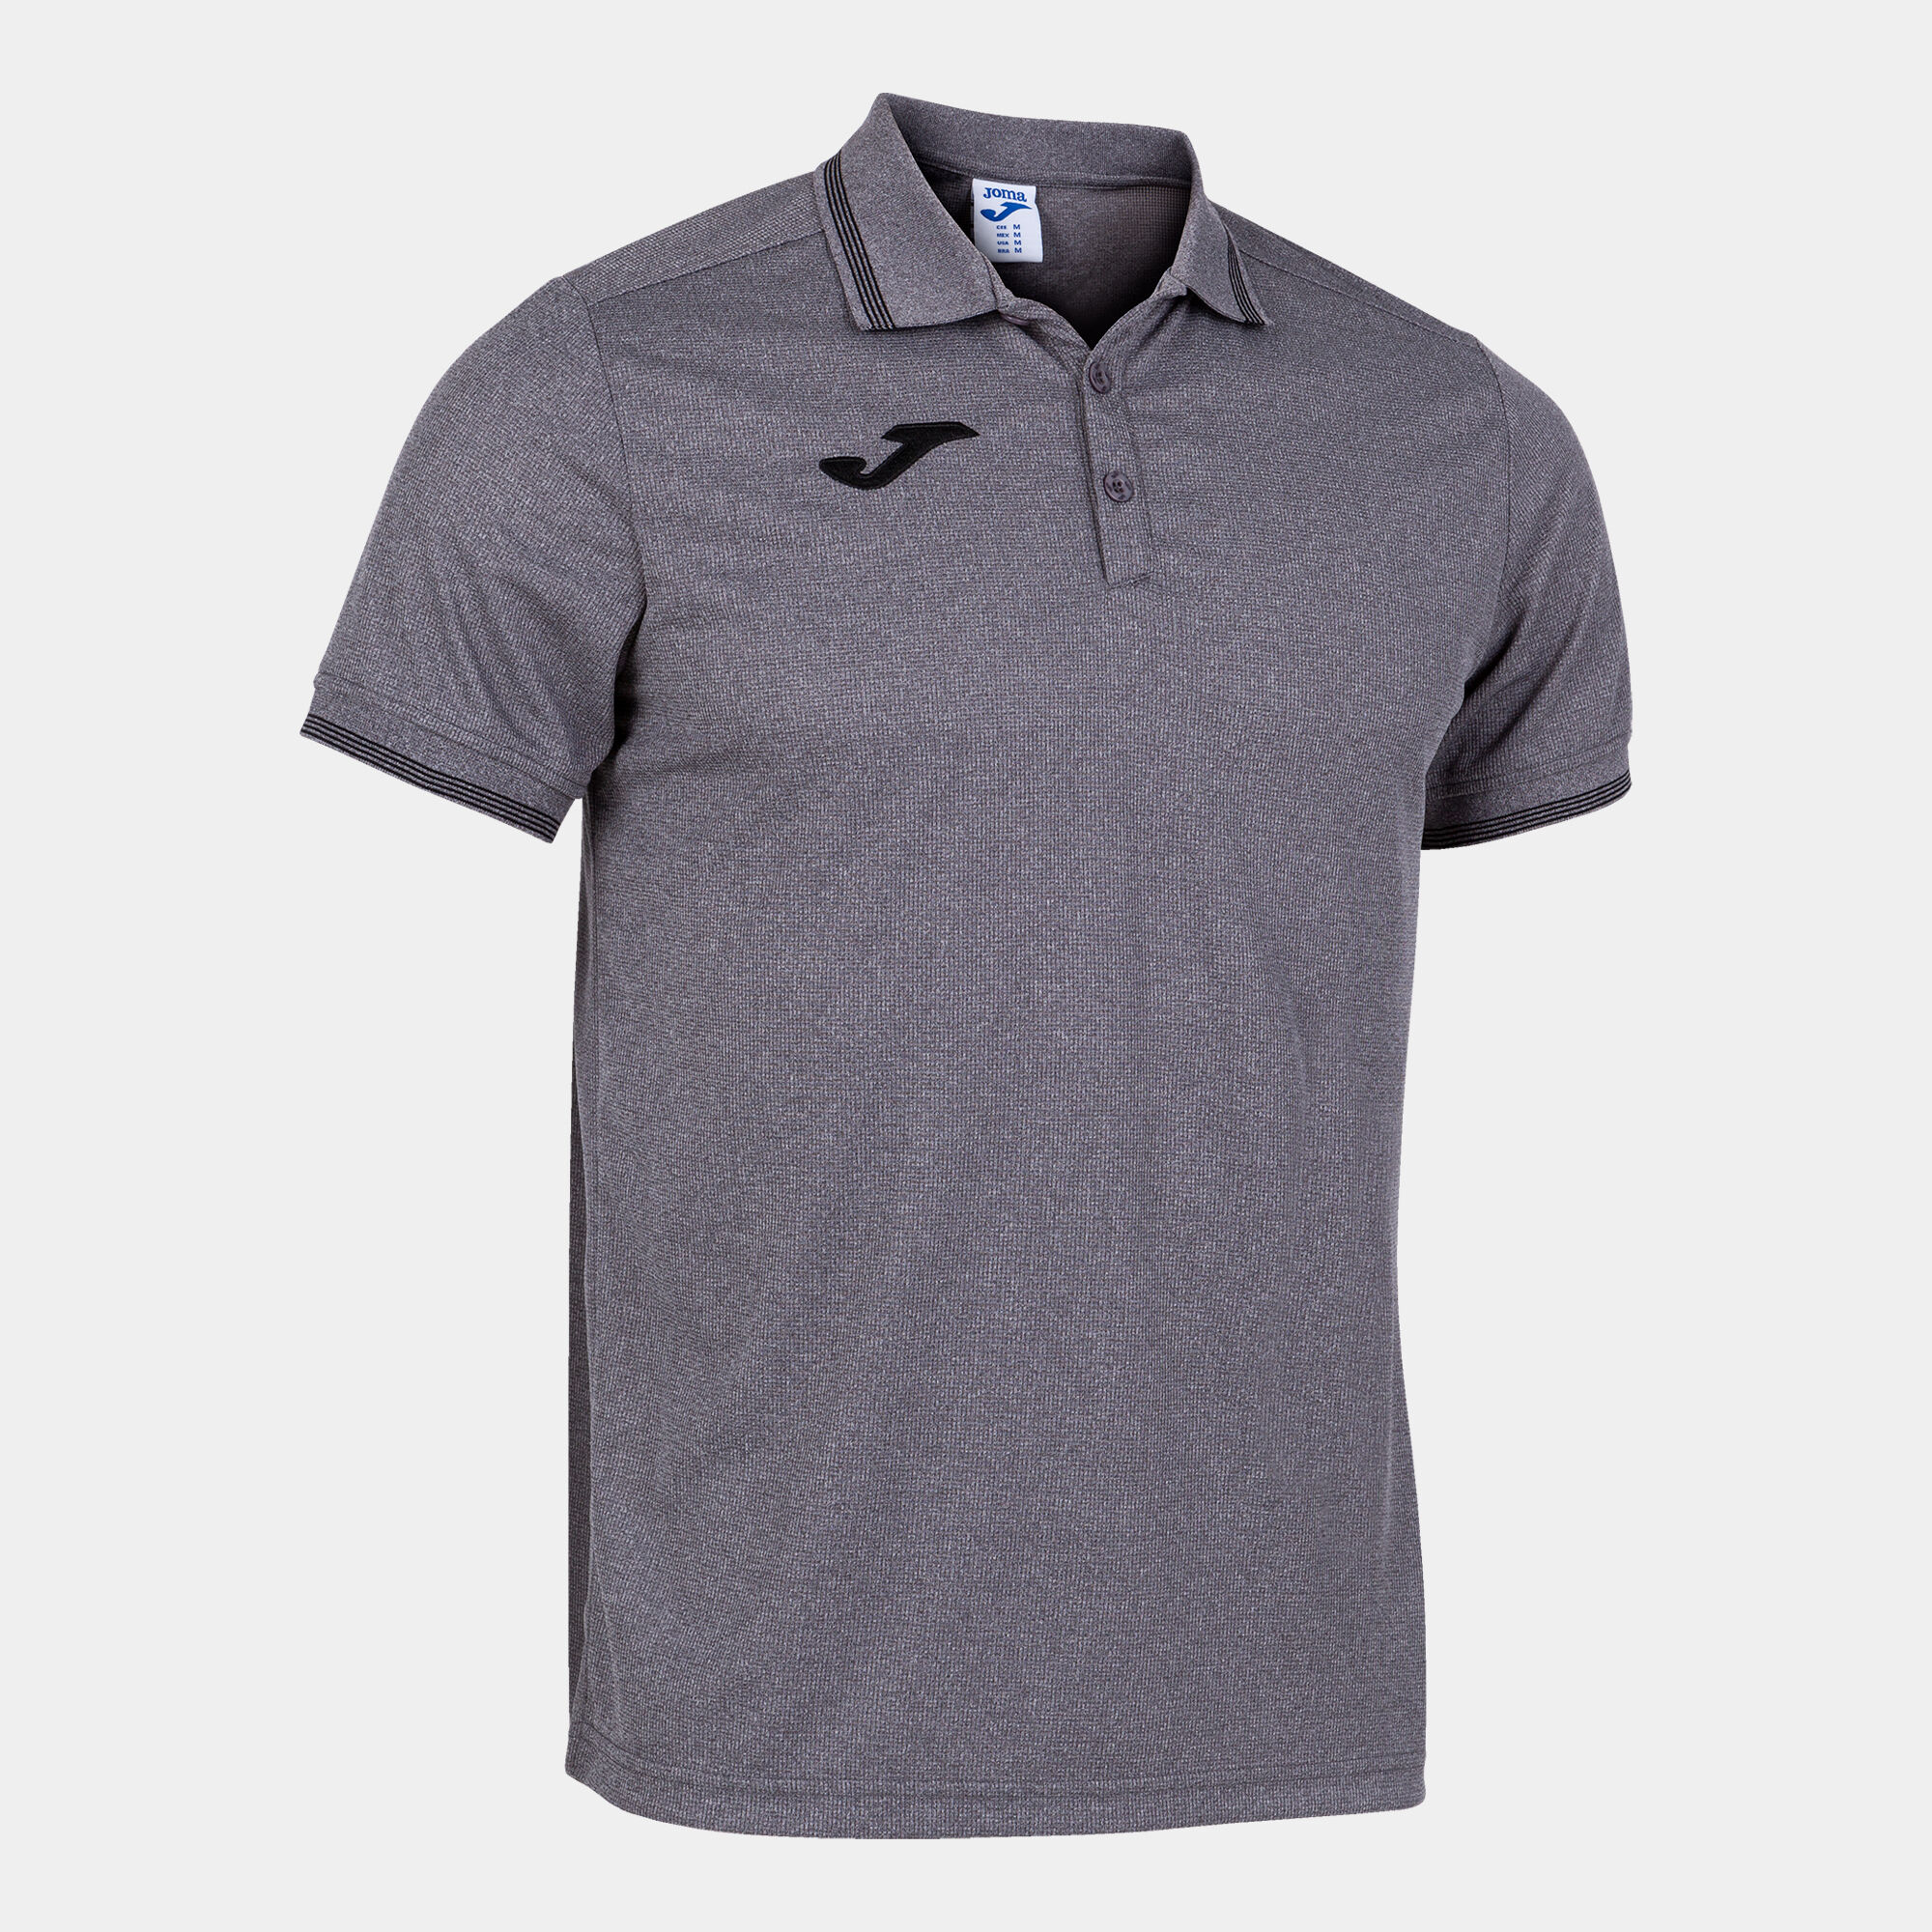 POLO MANCHES COURTES HOMME CAMPUS III GRIS MELANGE